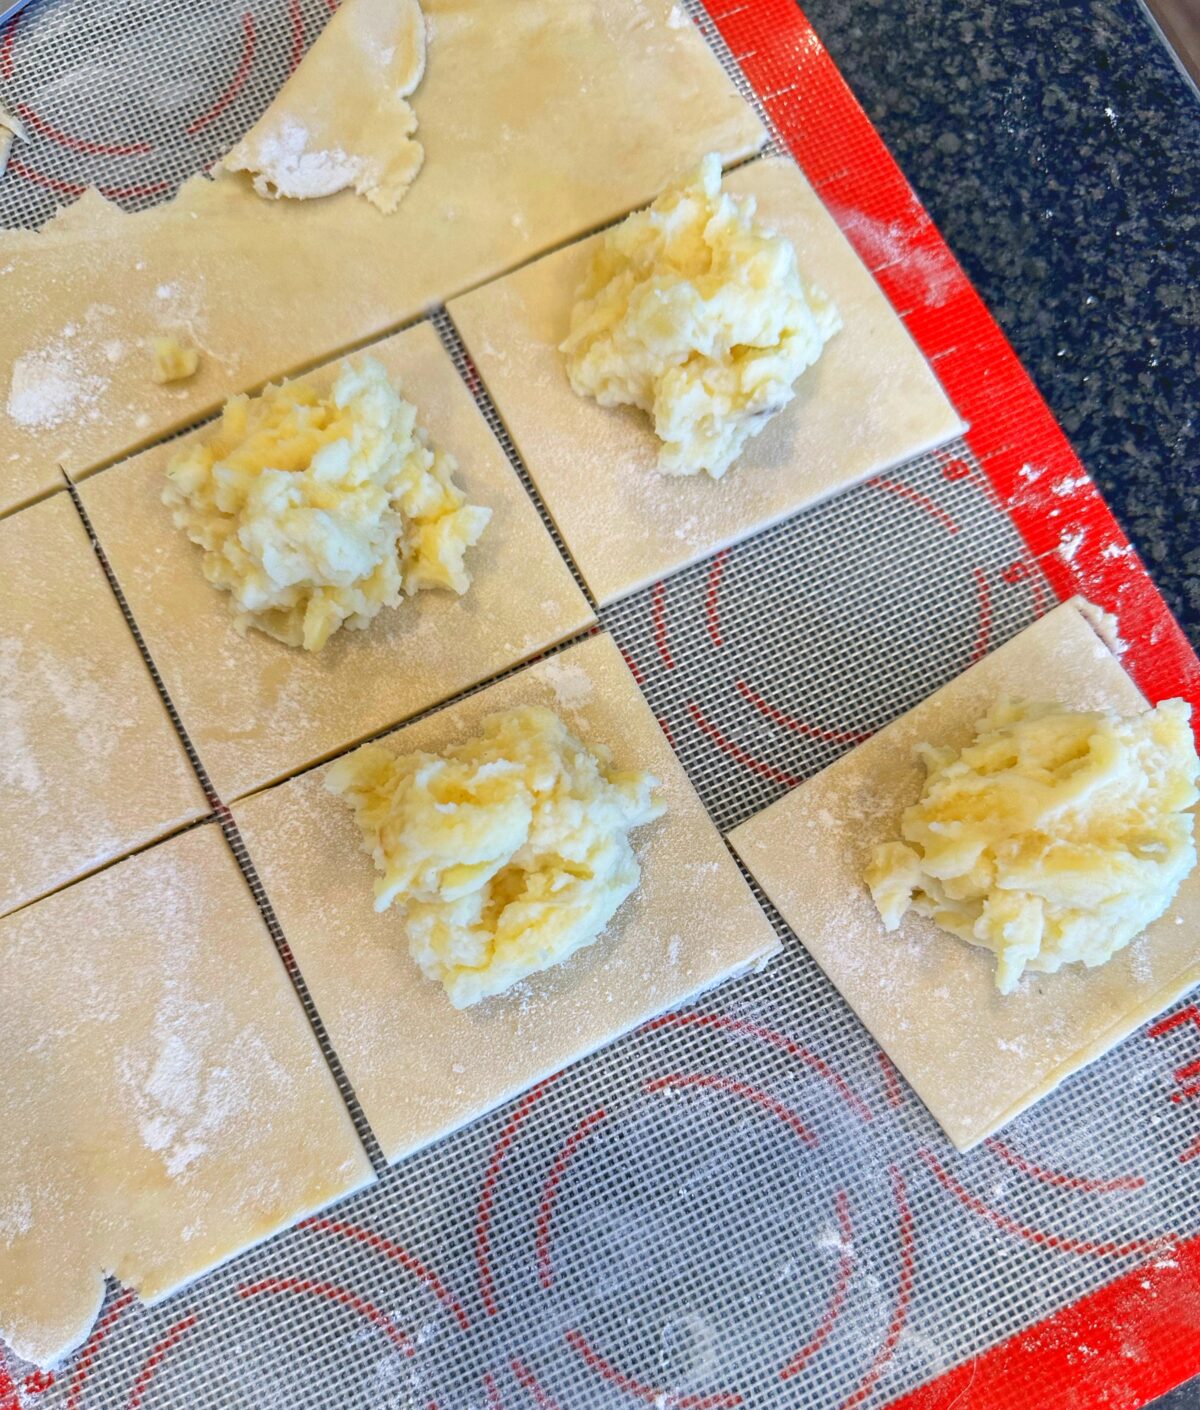 Making the knishes